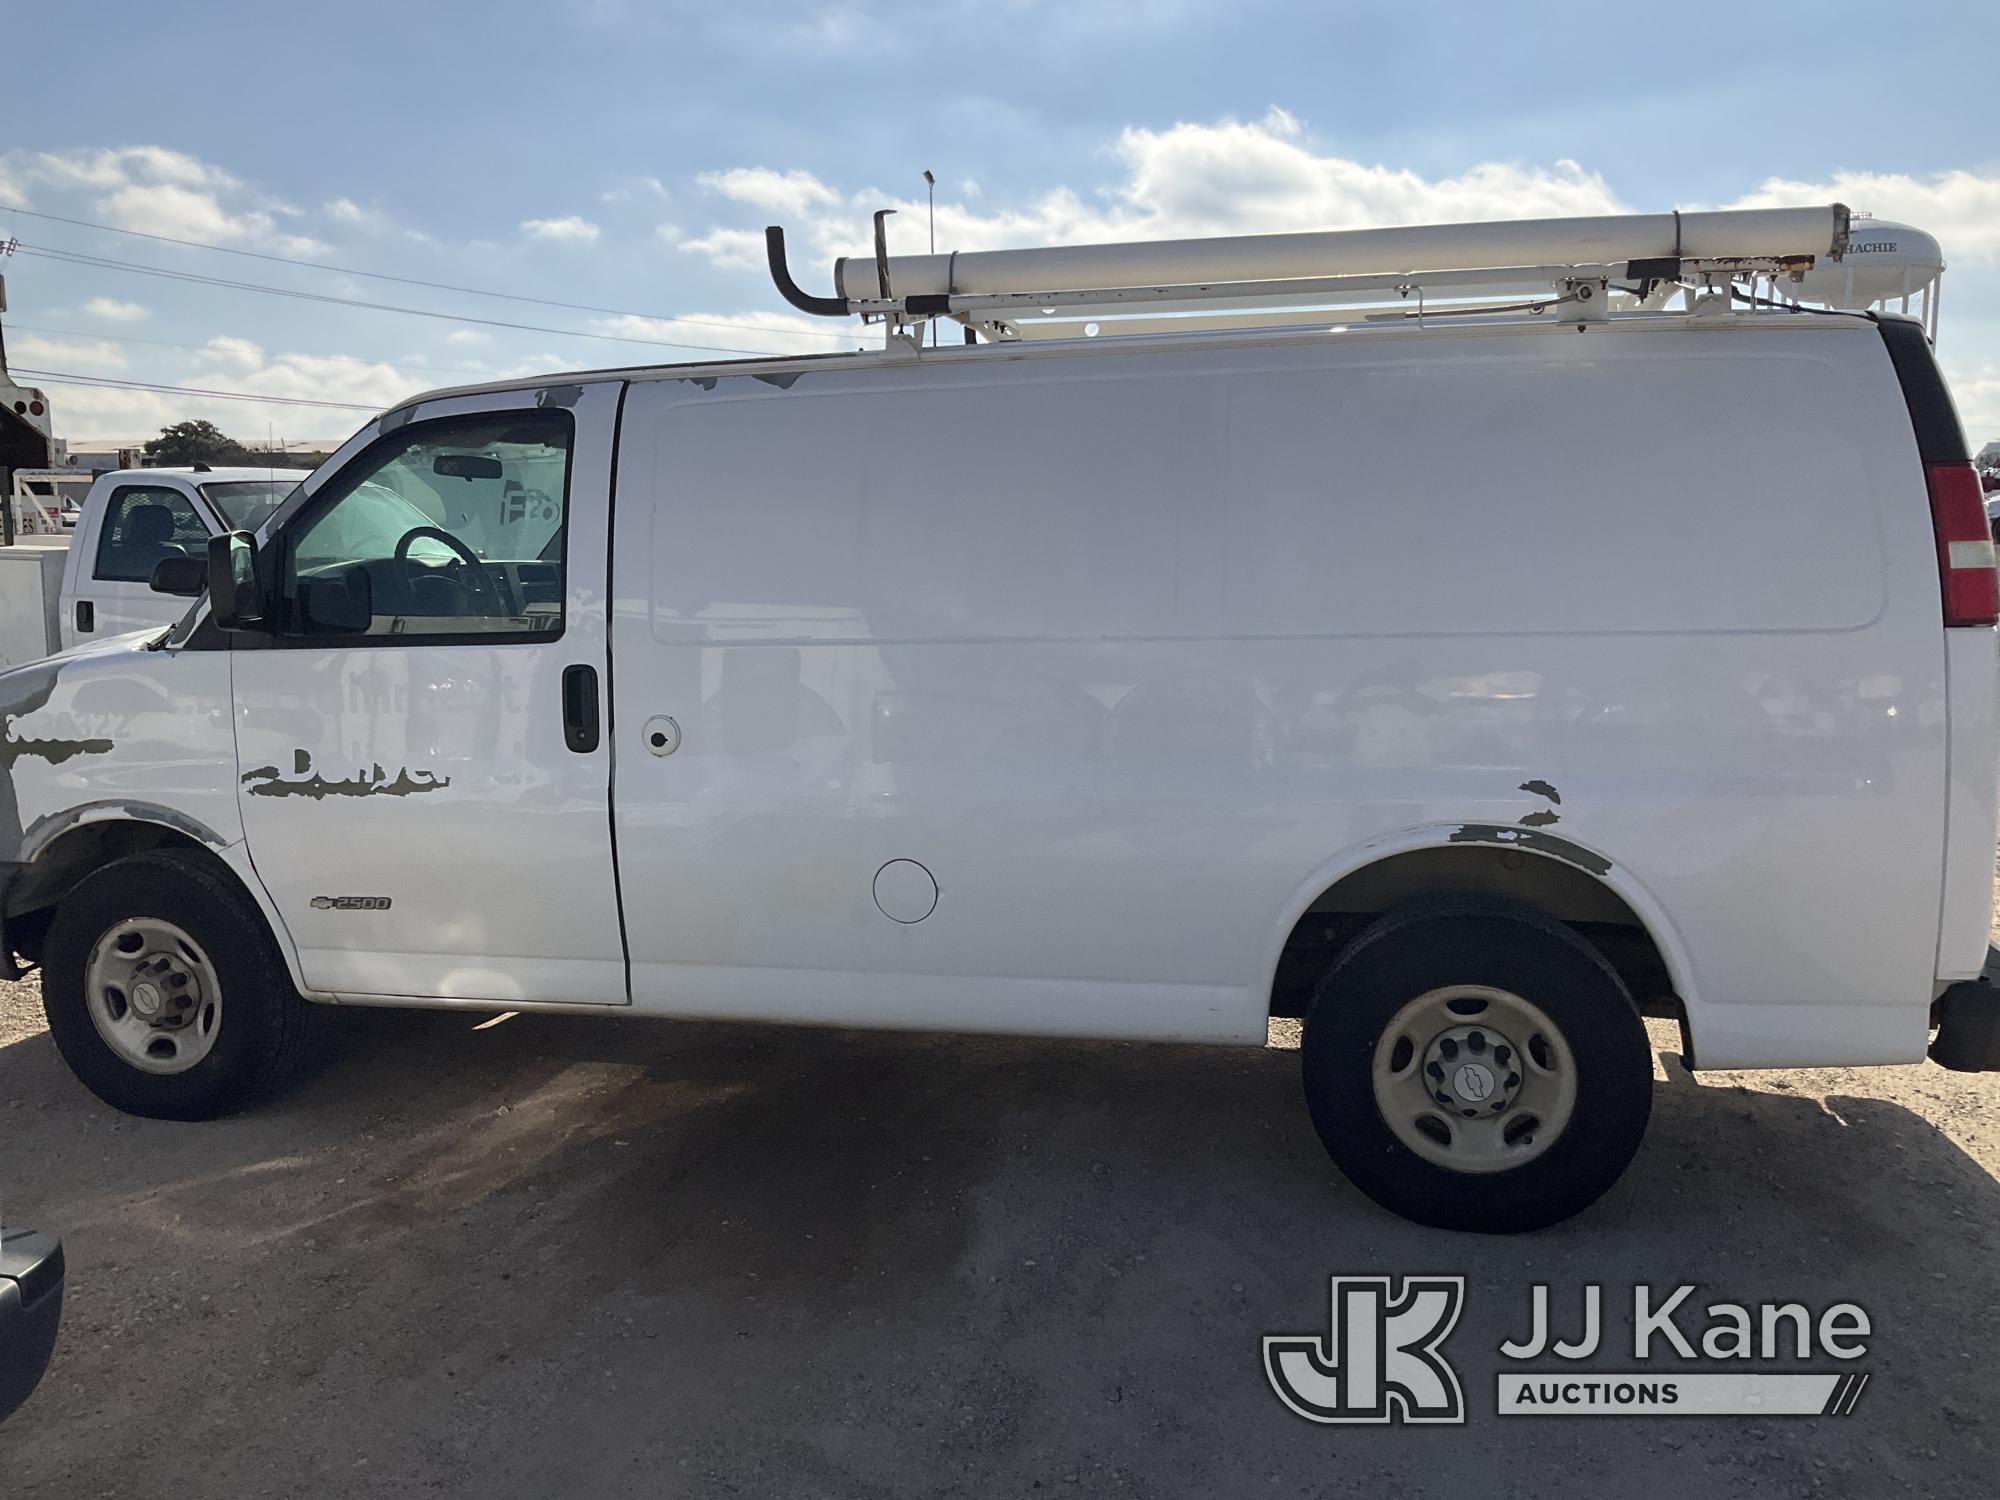 (Waxahachie, TX) 2006 Chevrolet Express G2500 Cargo Van Starts But Will Not Run Or Move) (Dies Immed